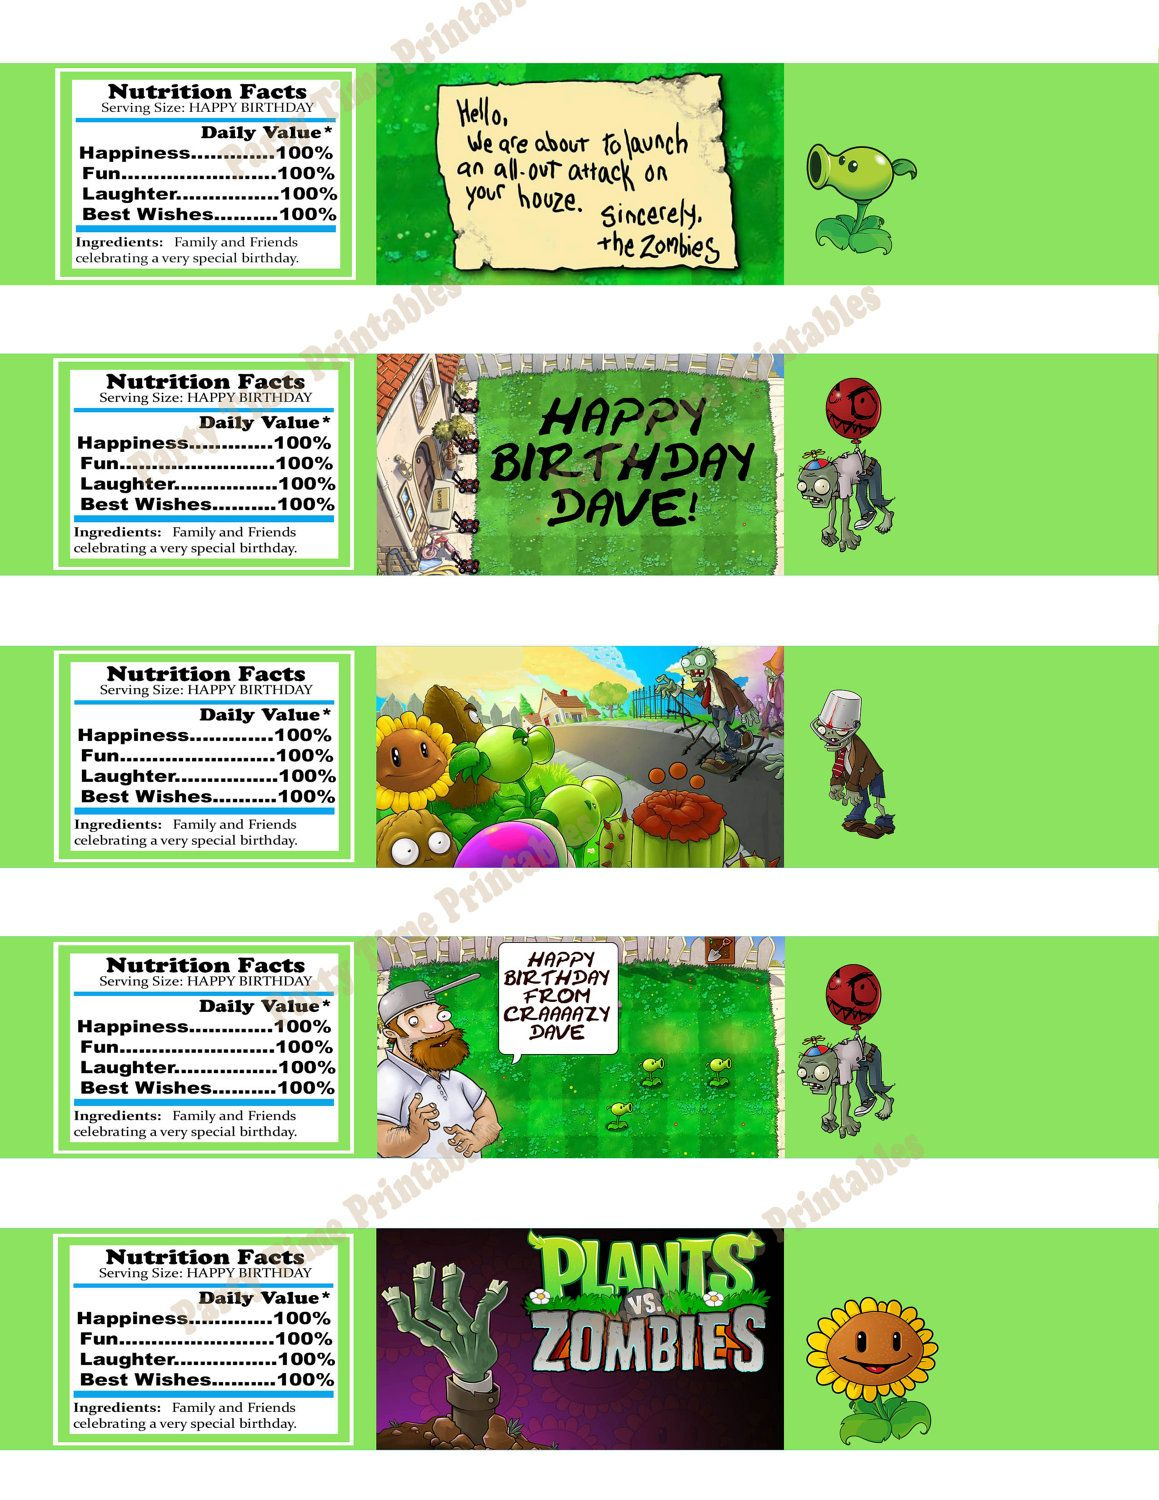 Printable Water Bottle Label- Party Printables - Plants Vs Zombies - Plants Vs Zombies Free Printable Invitations